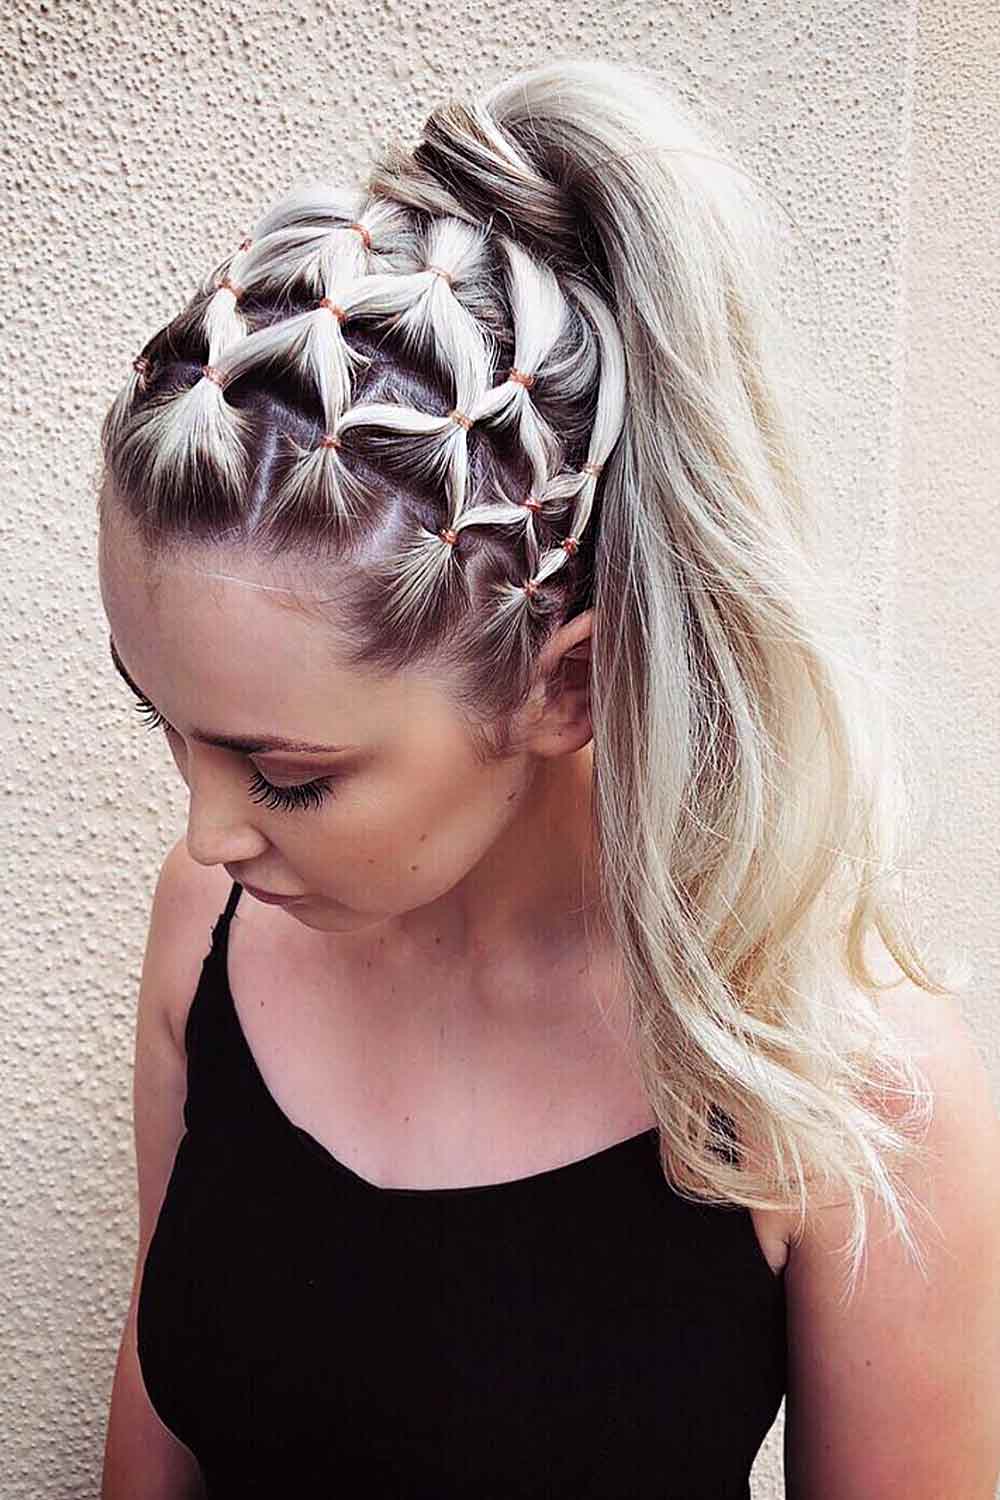 42 Cute Rubber Band Hairstyles For Little Girls - Hood MWR